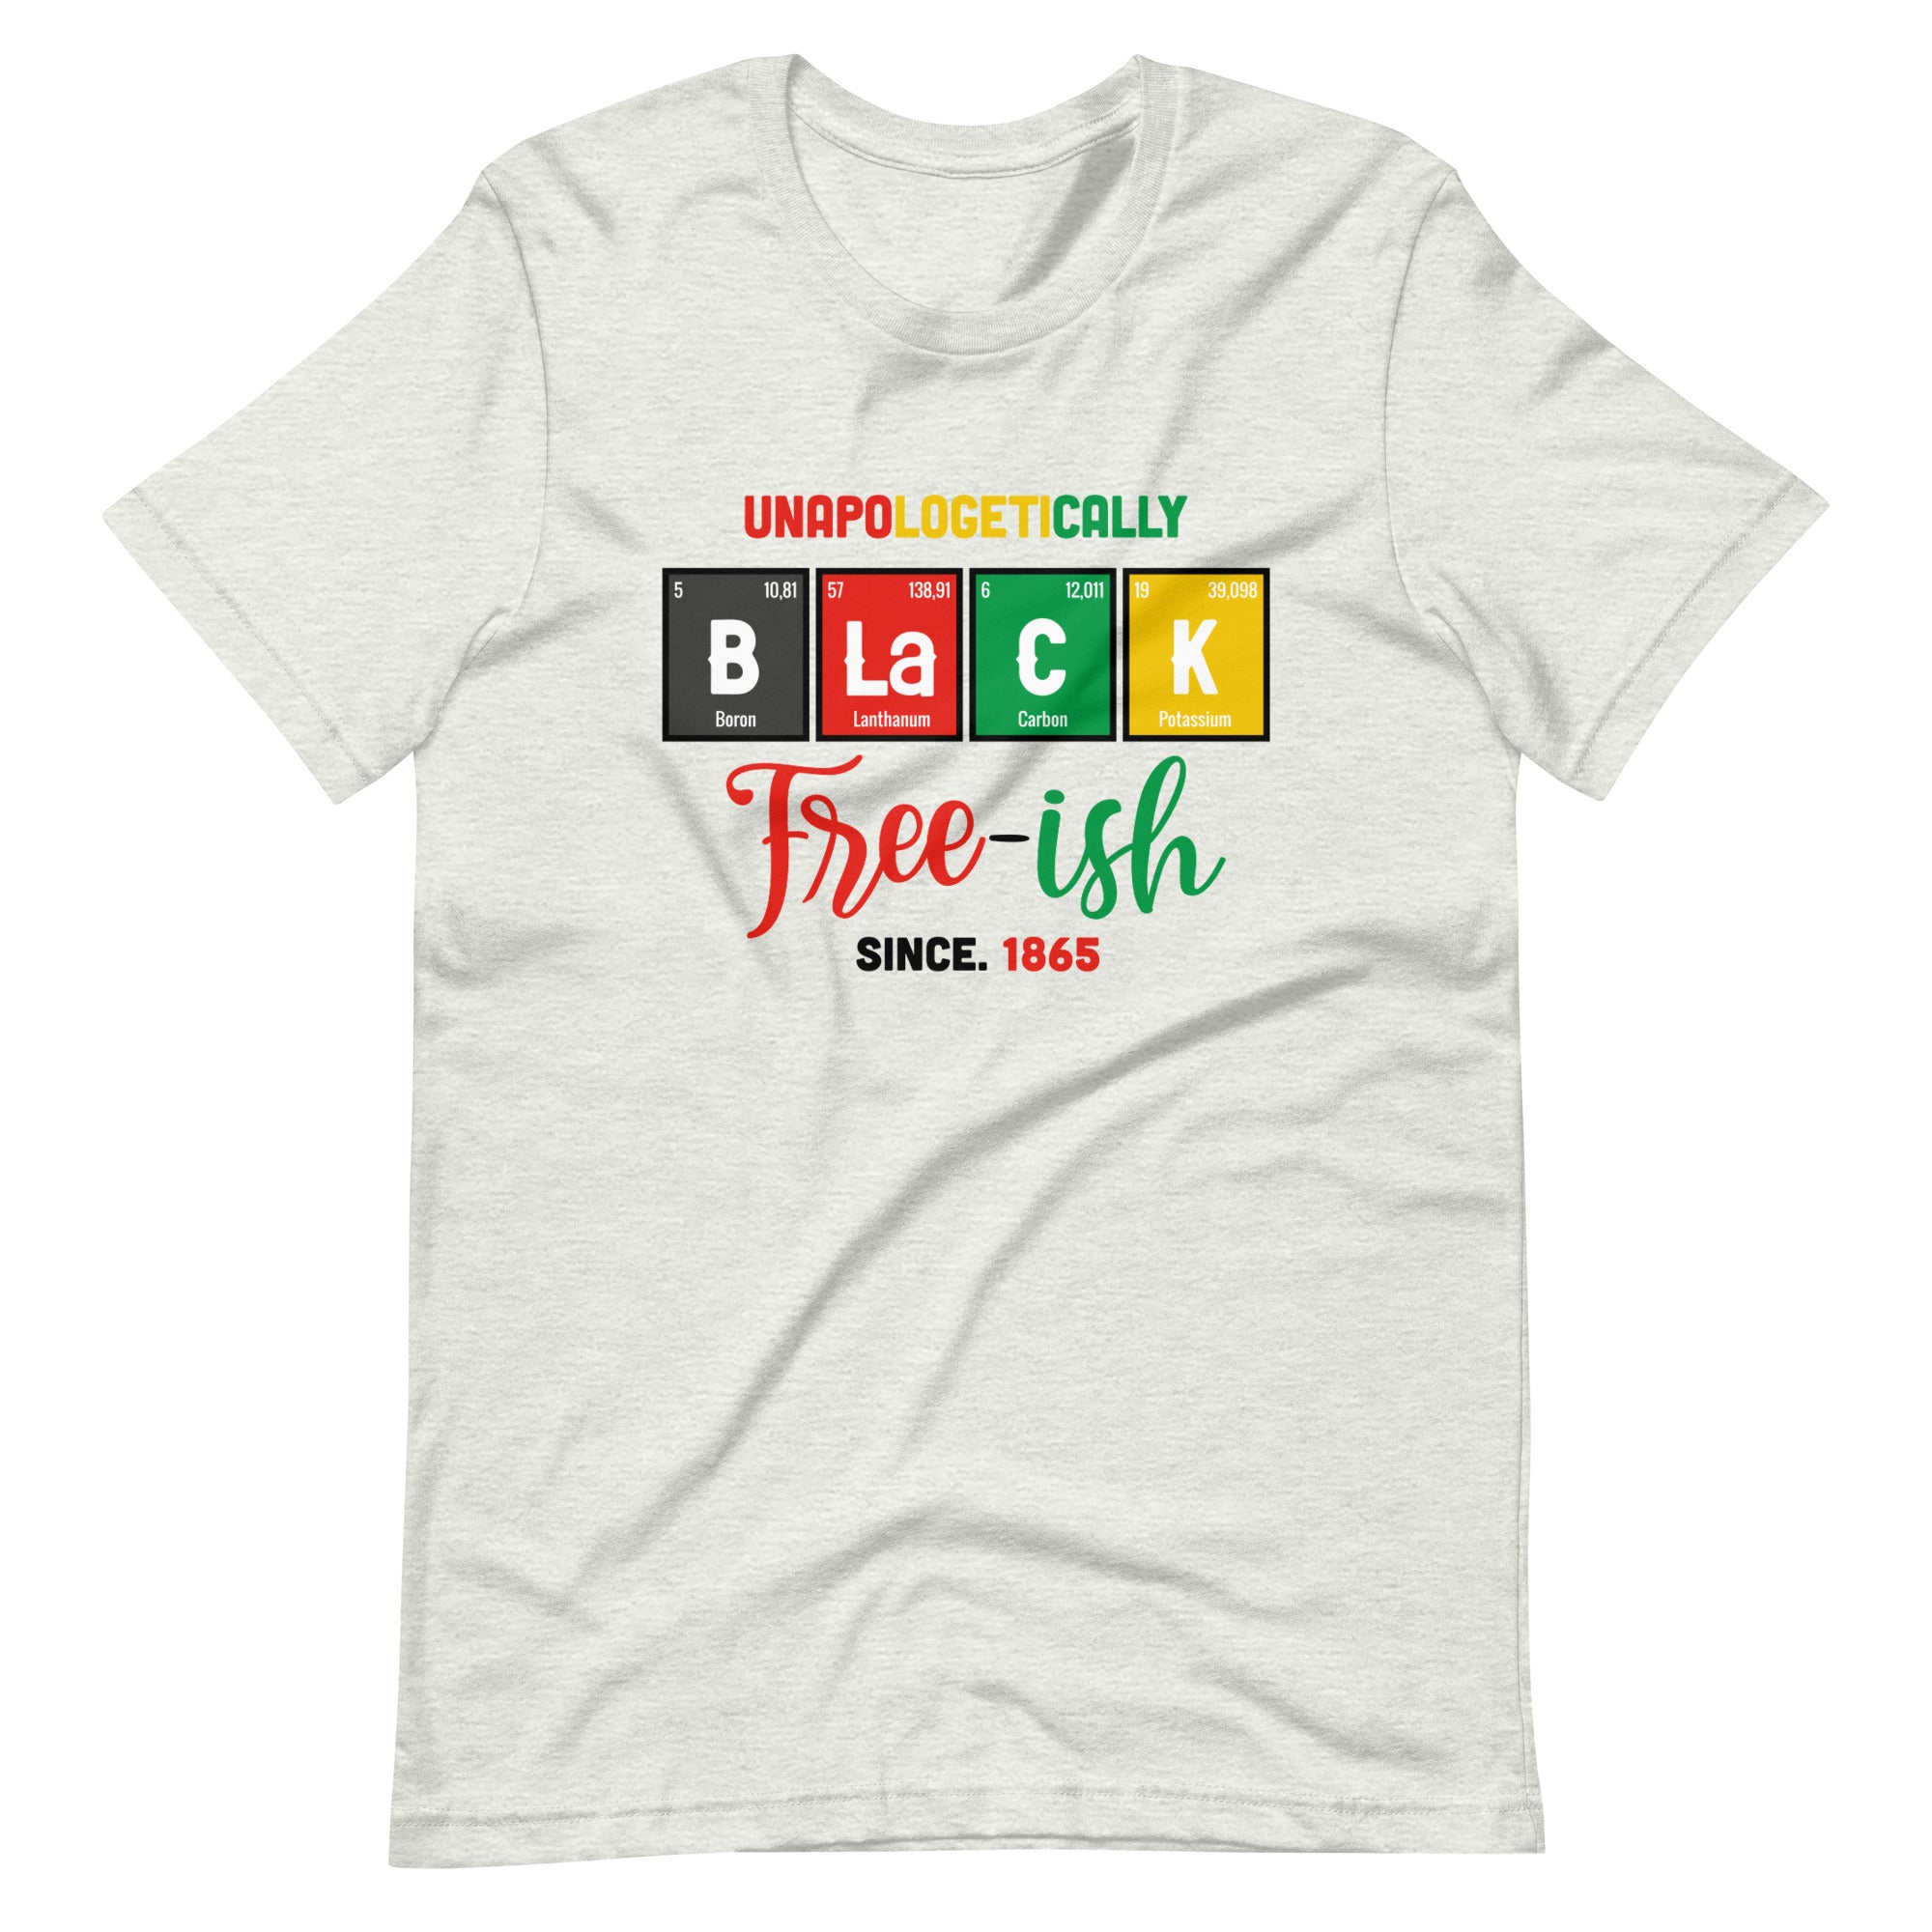 "Unapologetically" Unisex t-shirt (blk)